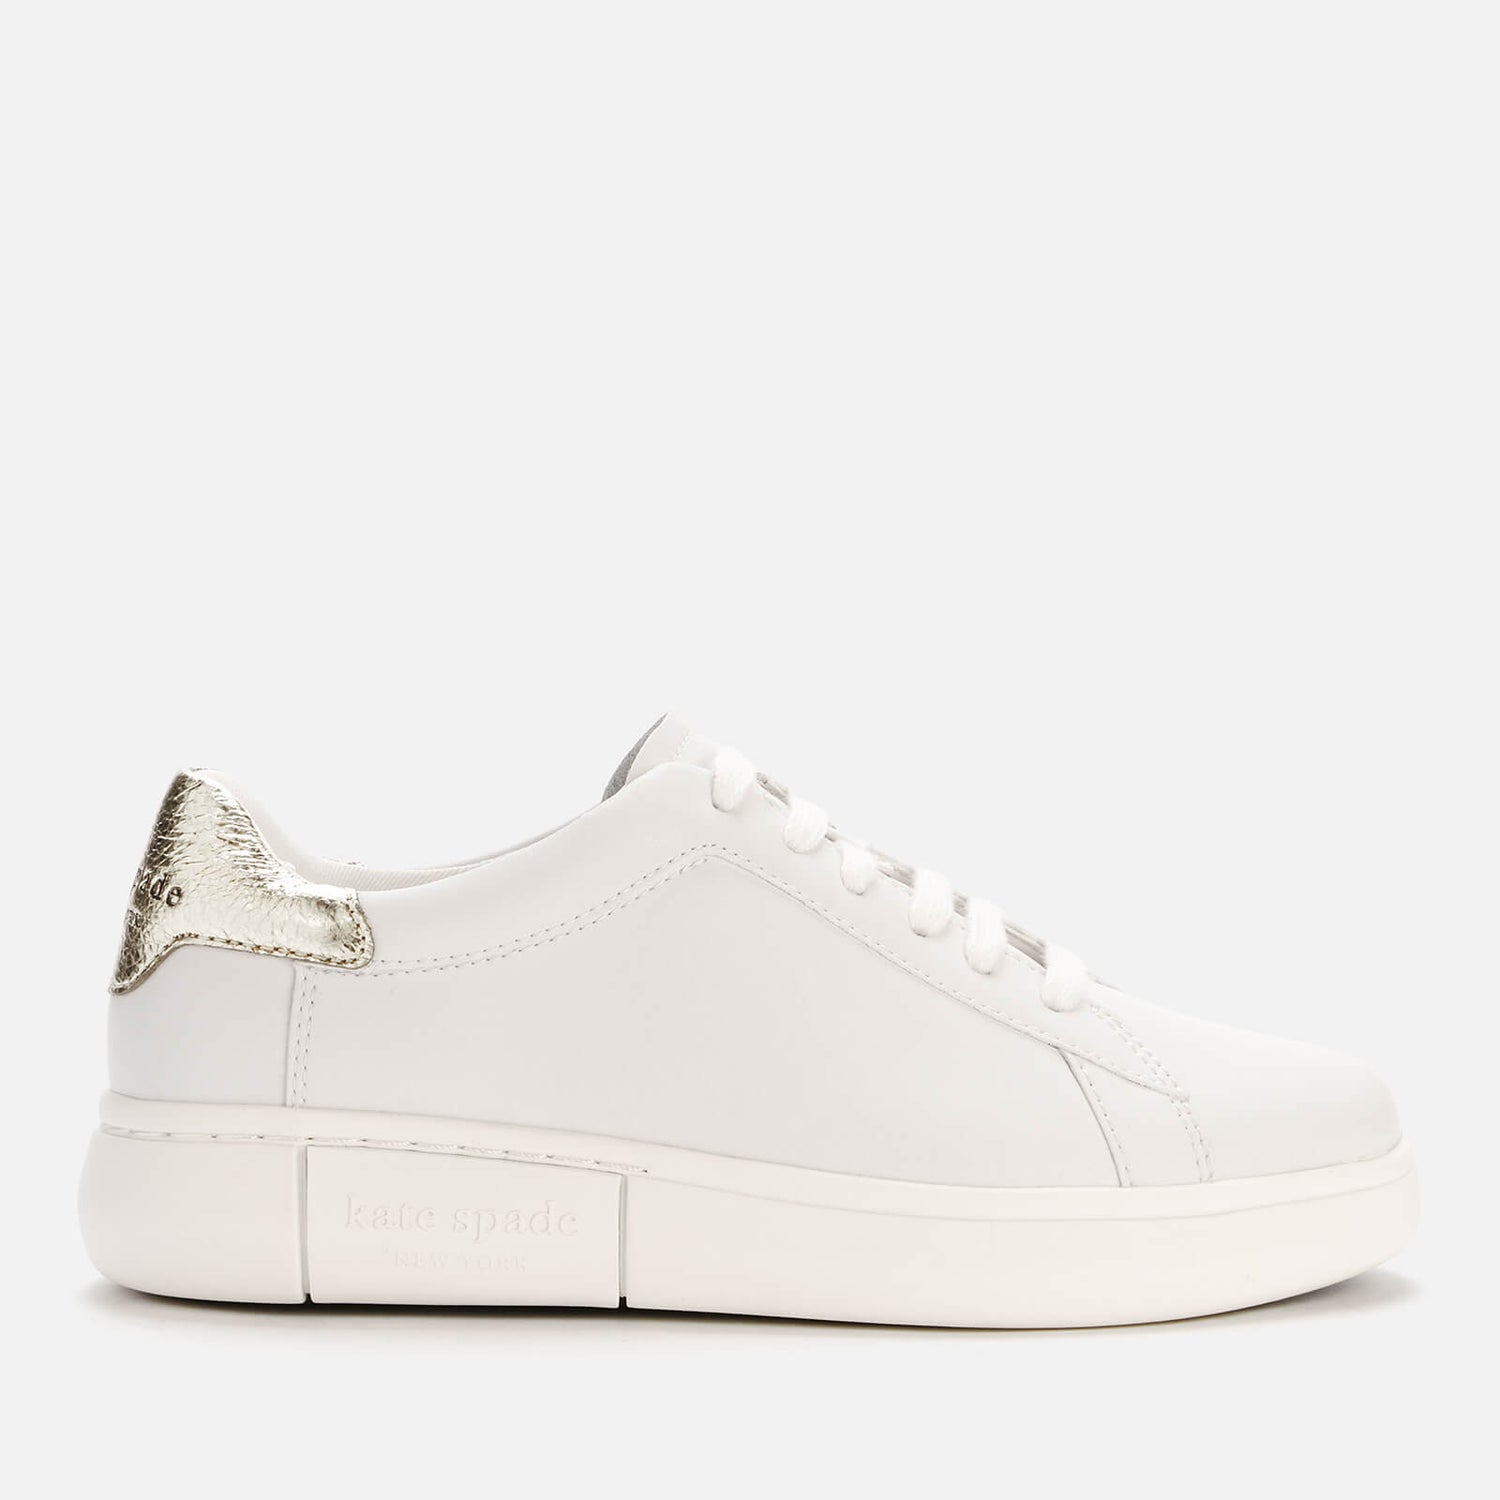 Kate Spade New York Women's Lift Leather Cupsole Trainers - Optic White/Pale Gold - UK 3